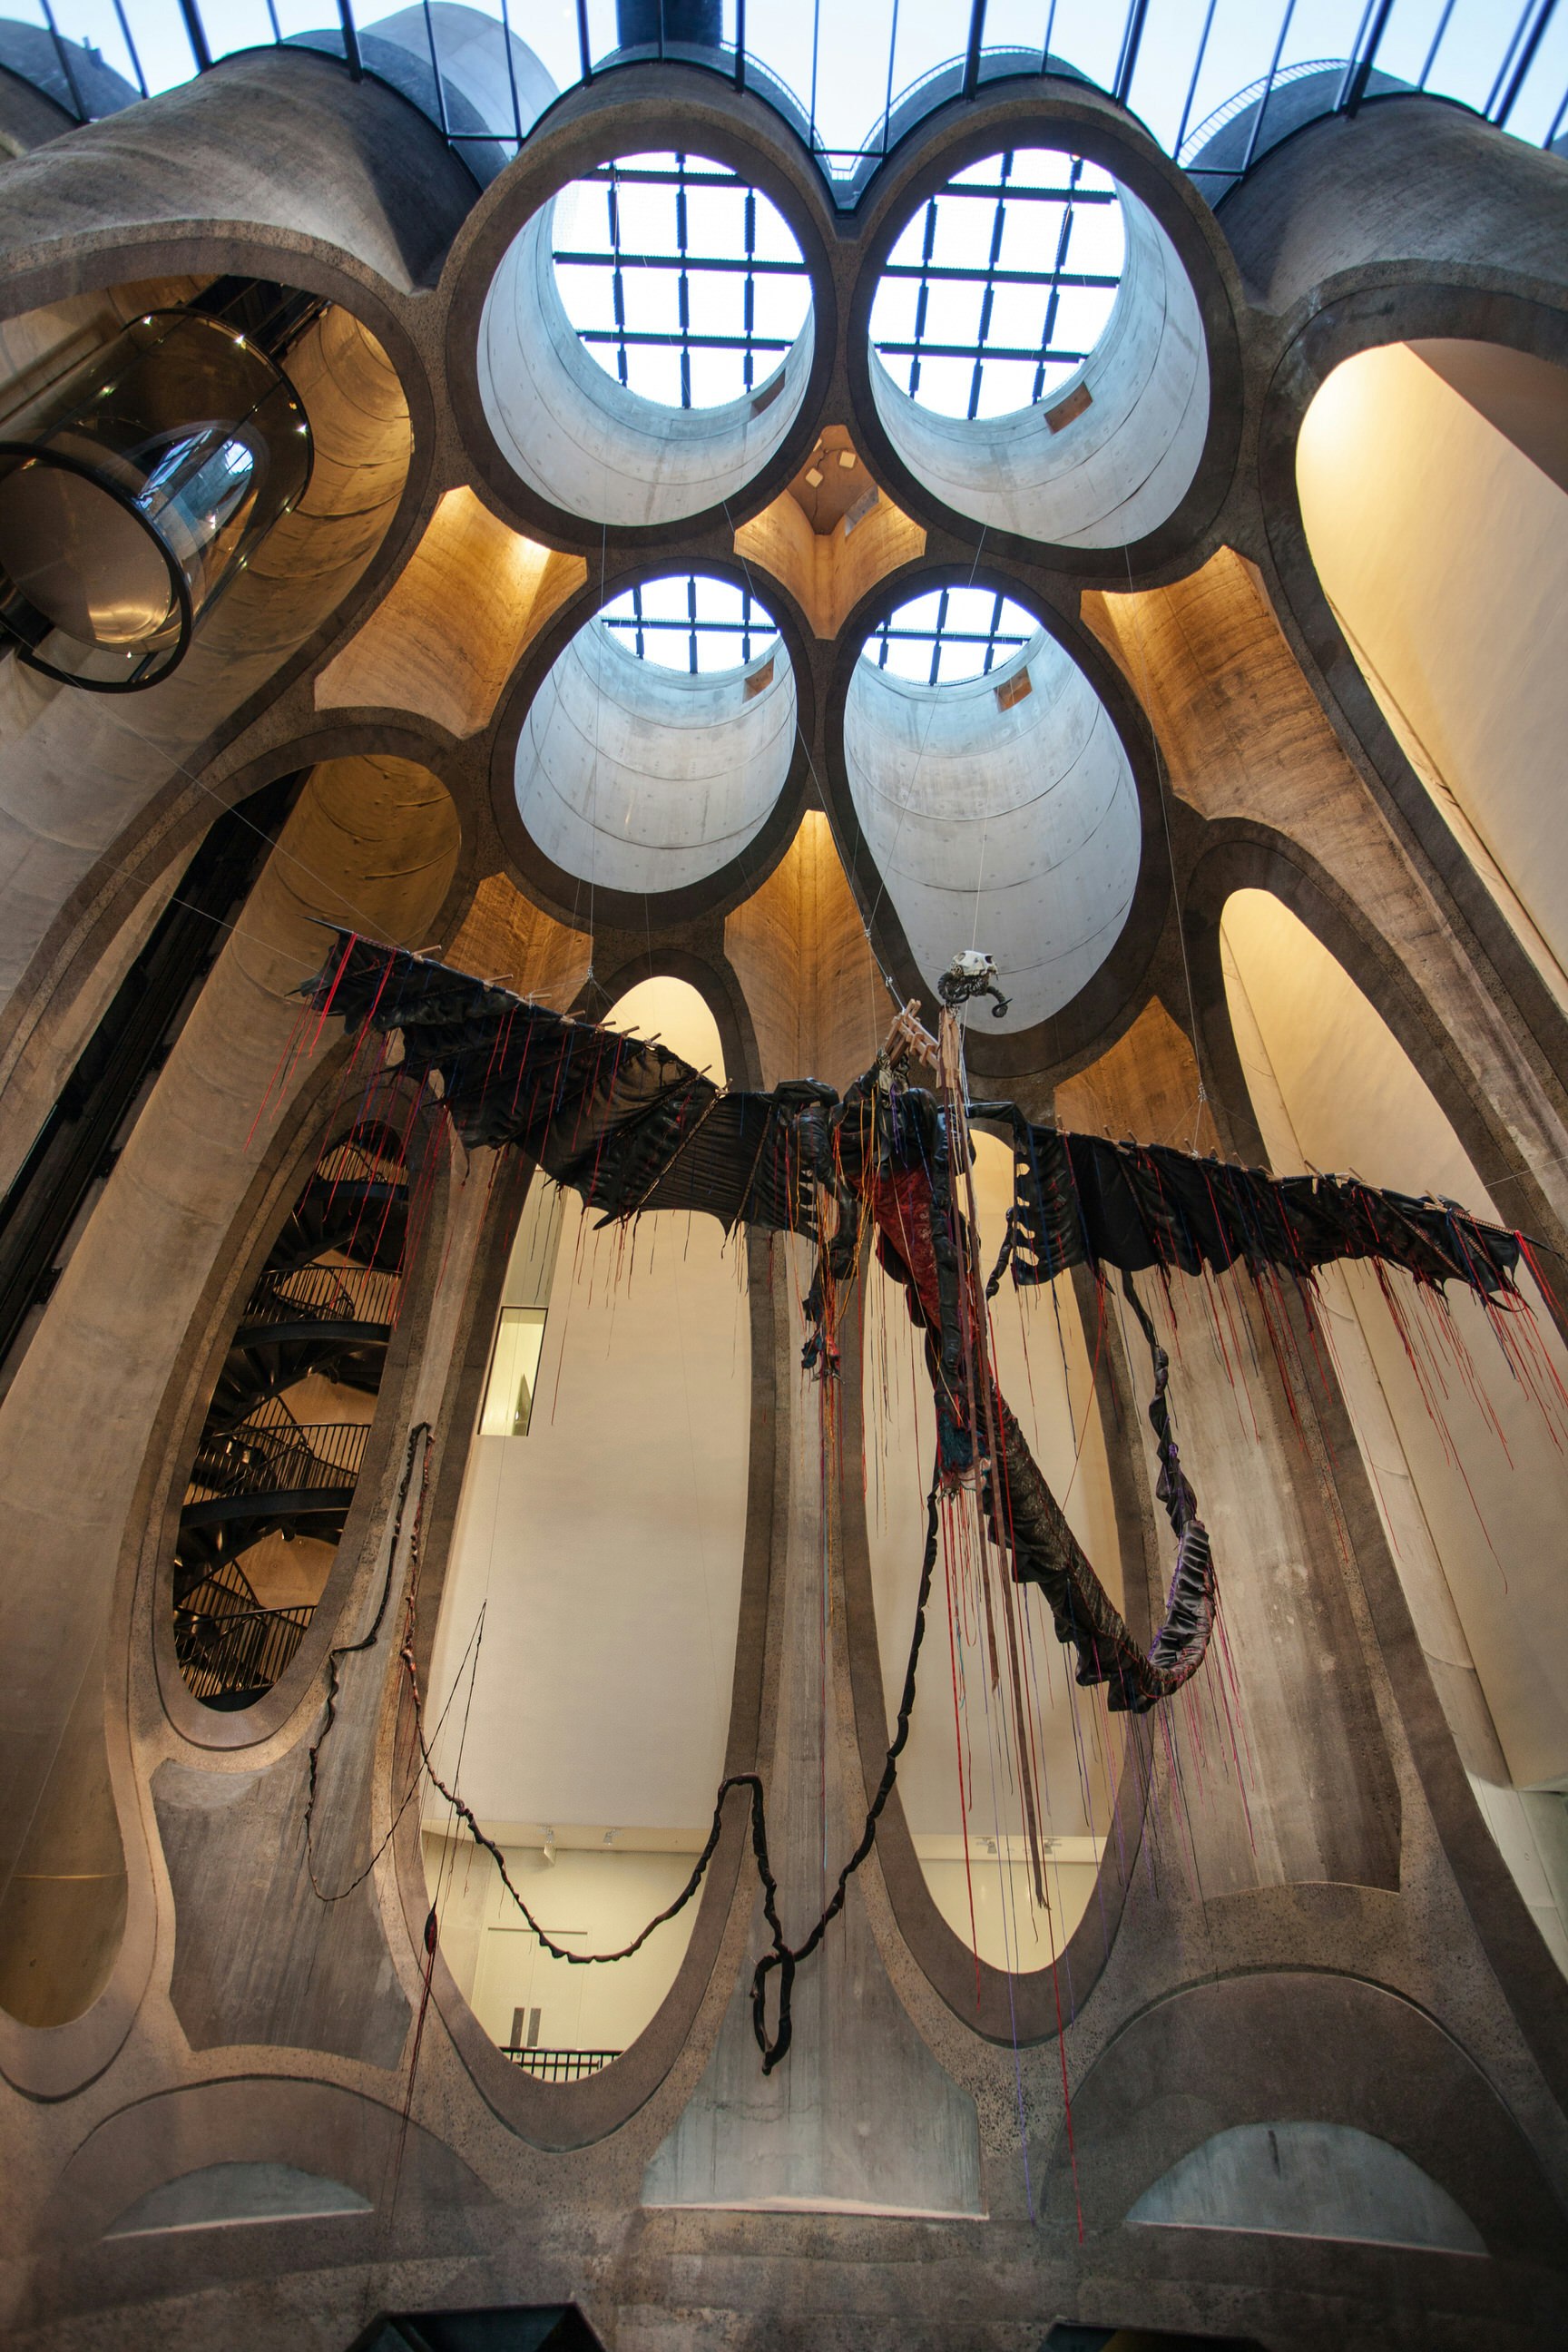 A pterodactyl-like piece of art hangs in a huge atrium within the Zeitz MOCAA; the atrium has been hewn from a stack columnar silos, with each having been cut away in various ways (some appear as circles floating above, while others have just had portions of their sides removed, which resemble oval windows).